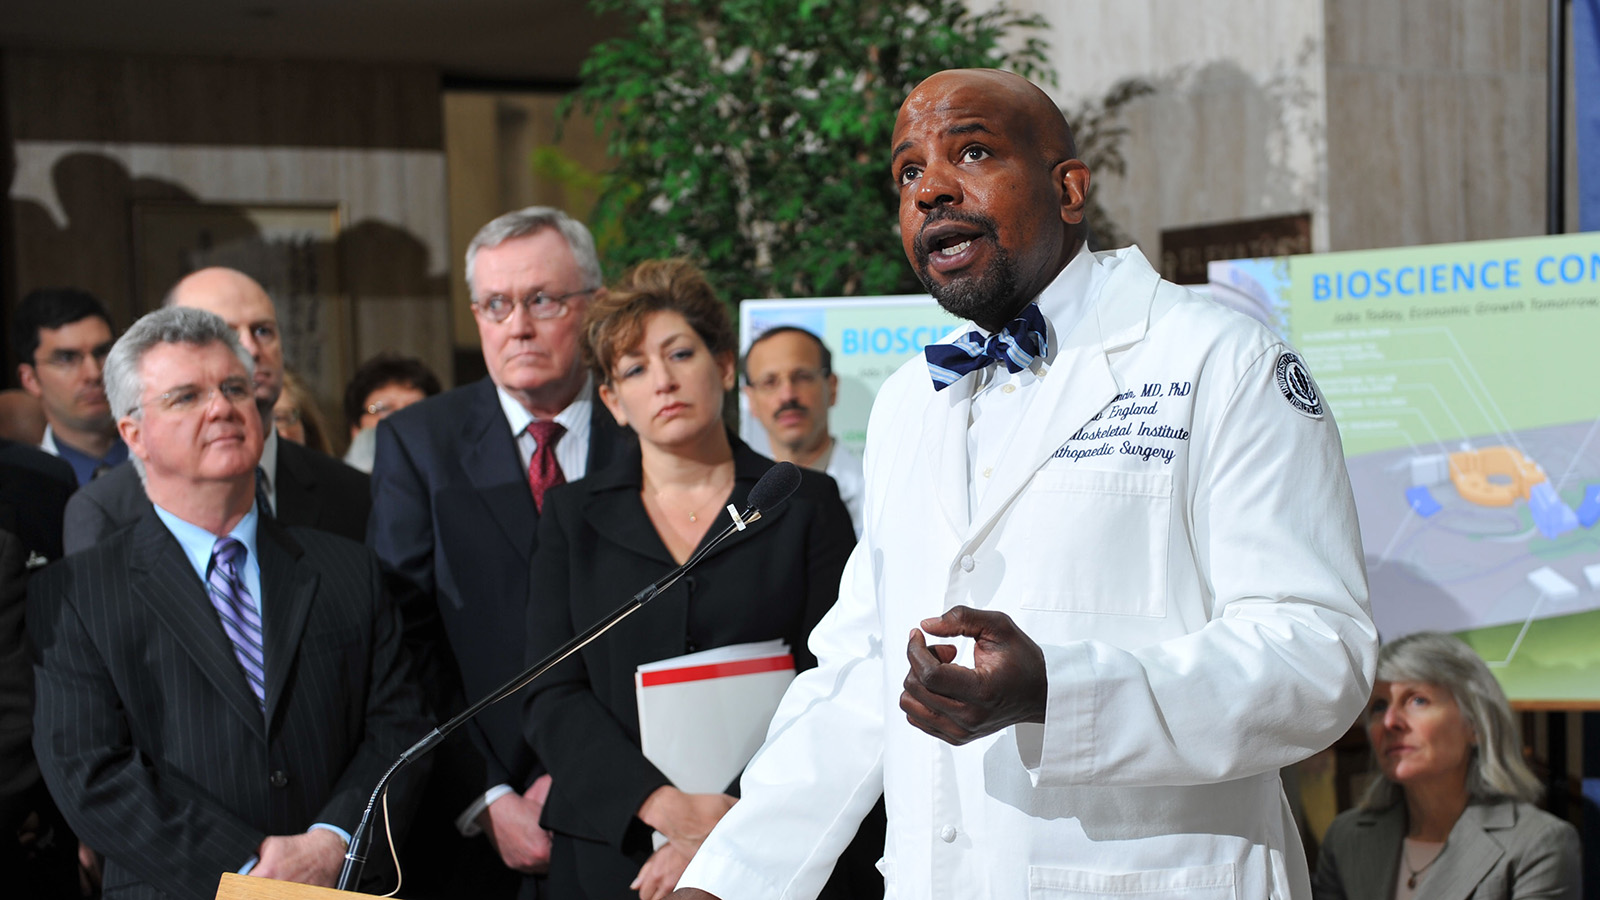 Cato Laurencin, dean of the school of medicine, speaks at a press conference held at the UConn Health Center to announce Bioscience Connecticut on May 17, 2011. (Peter Morenus/UConn Photo)